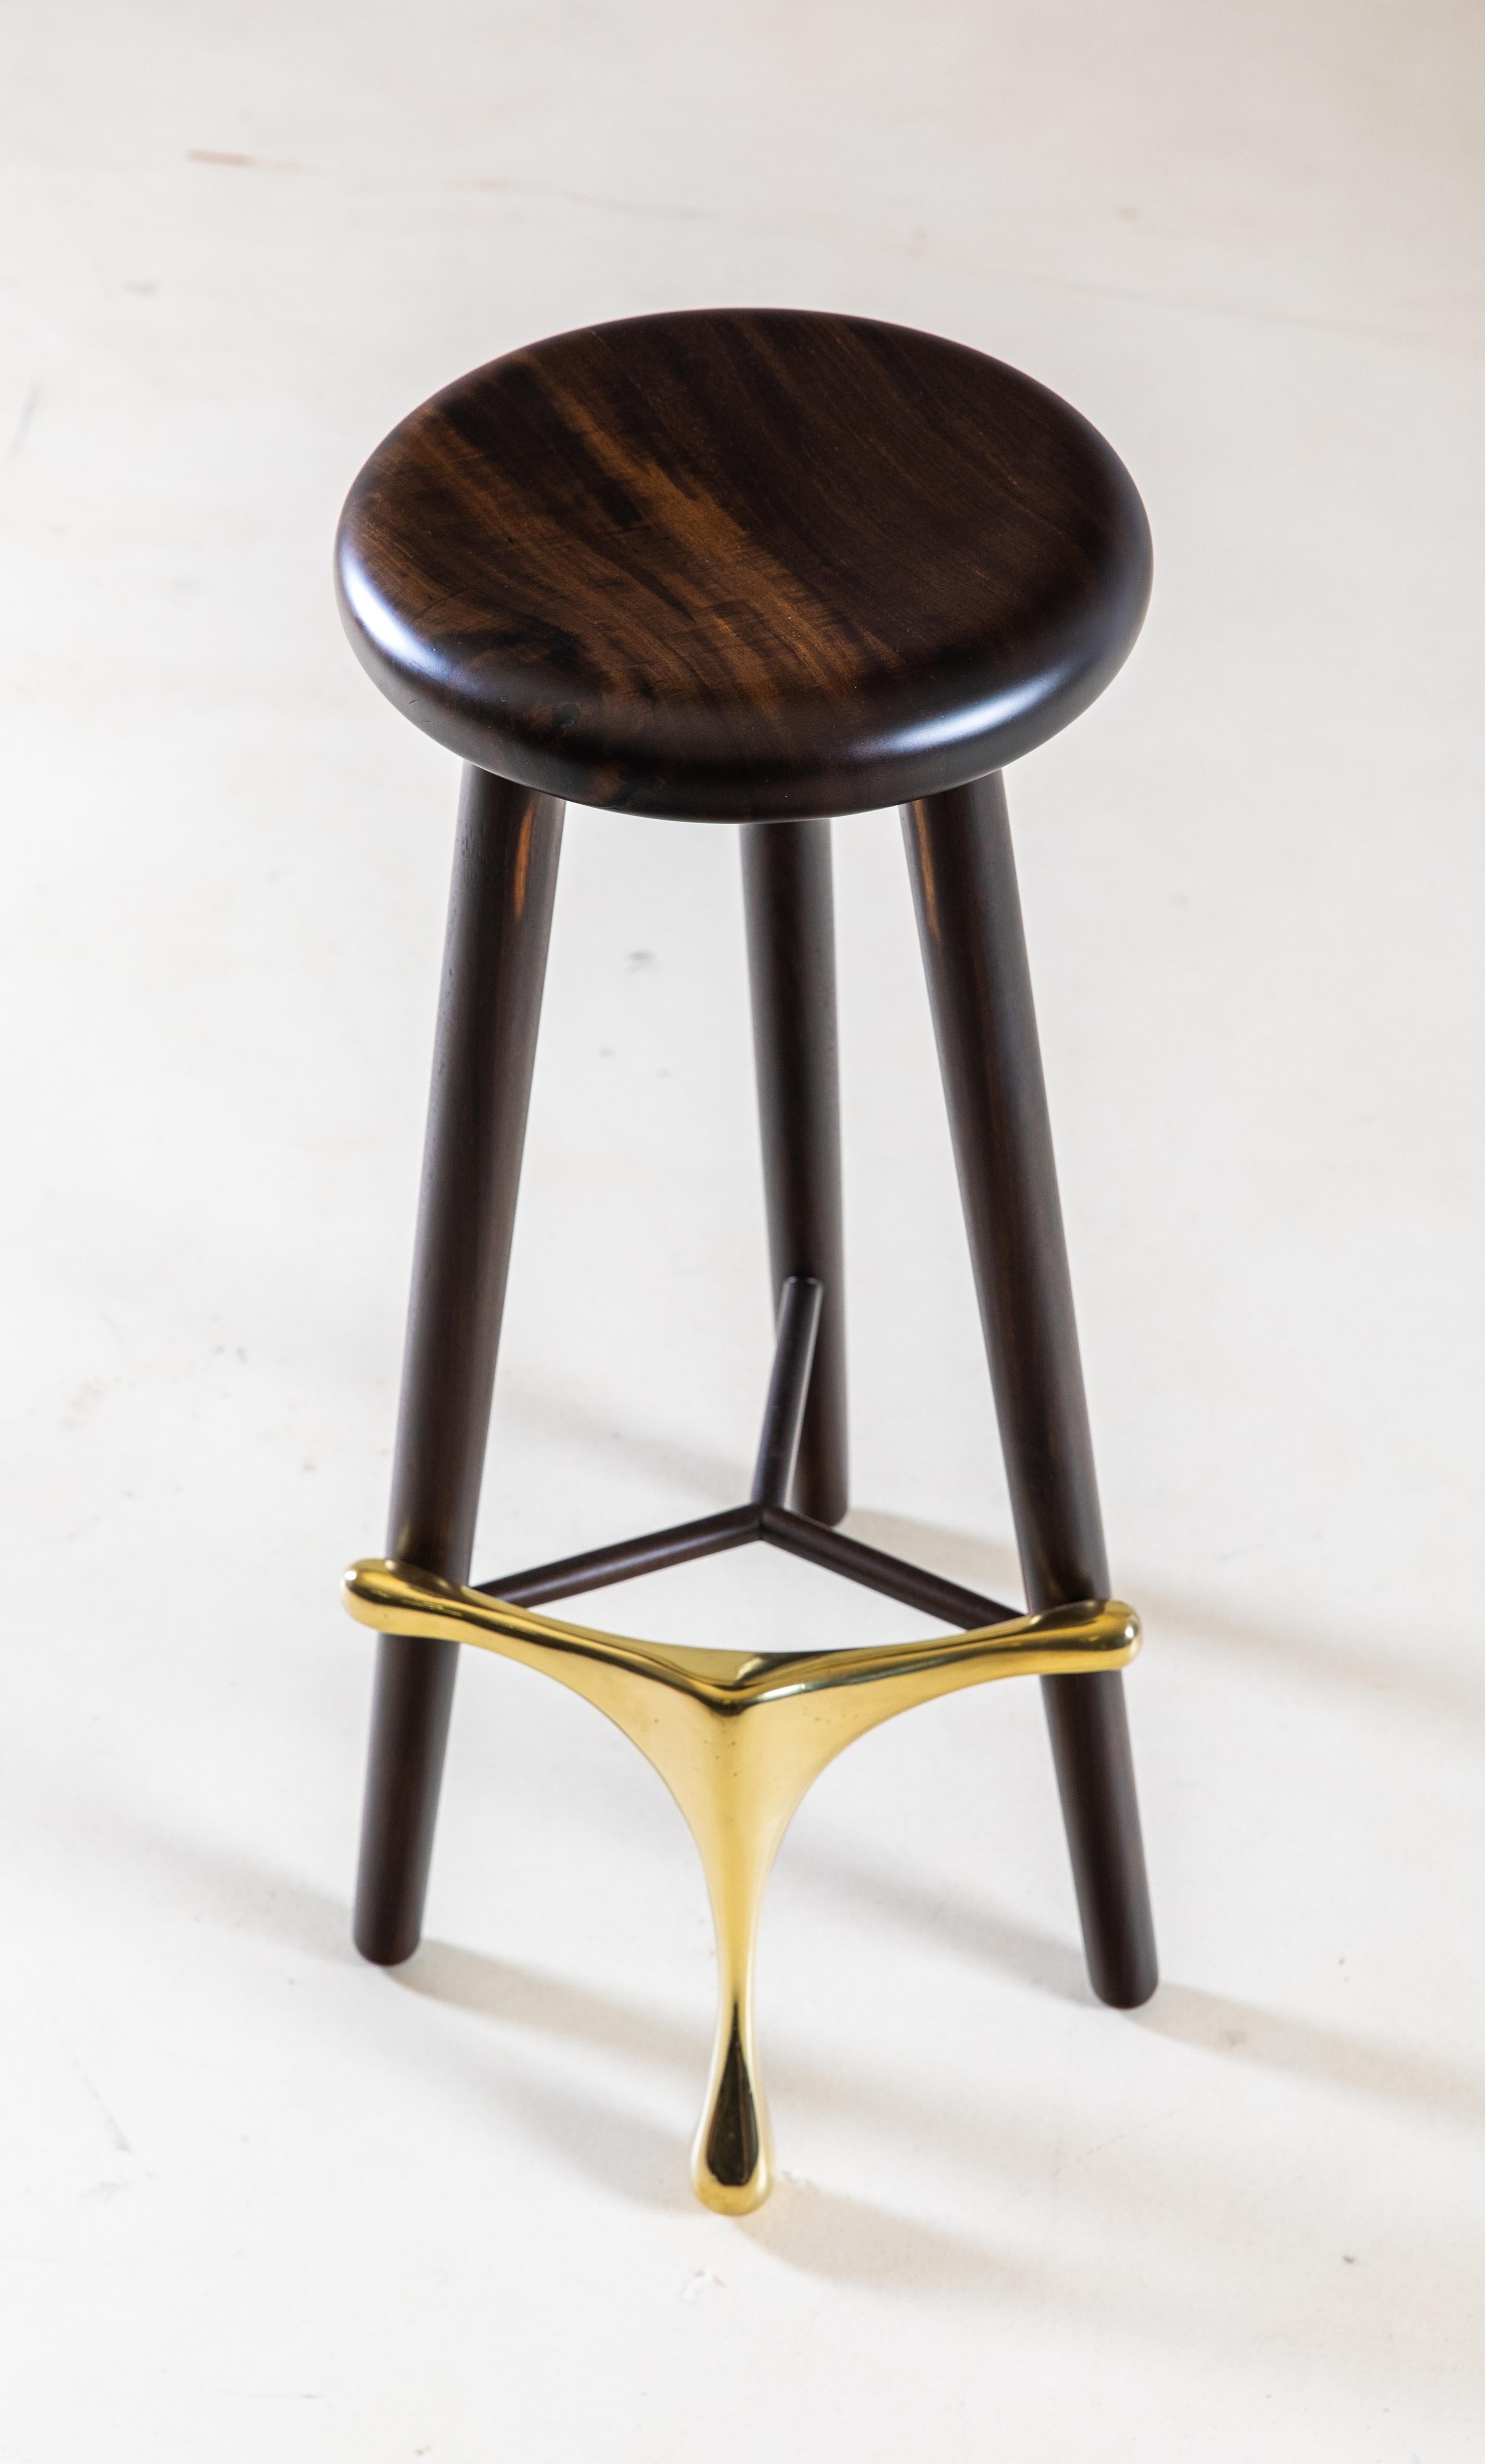 Amparo Braúna and Bronze Stool by Alva Design
Materials: solid wood (Braúna) and cast bronze.
Dimensions: W 37 x D 48 x H 63 cm.

Available in different wood options (Braúna or Freijó solid wood) and footrest options (solid wood, iron or cast